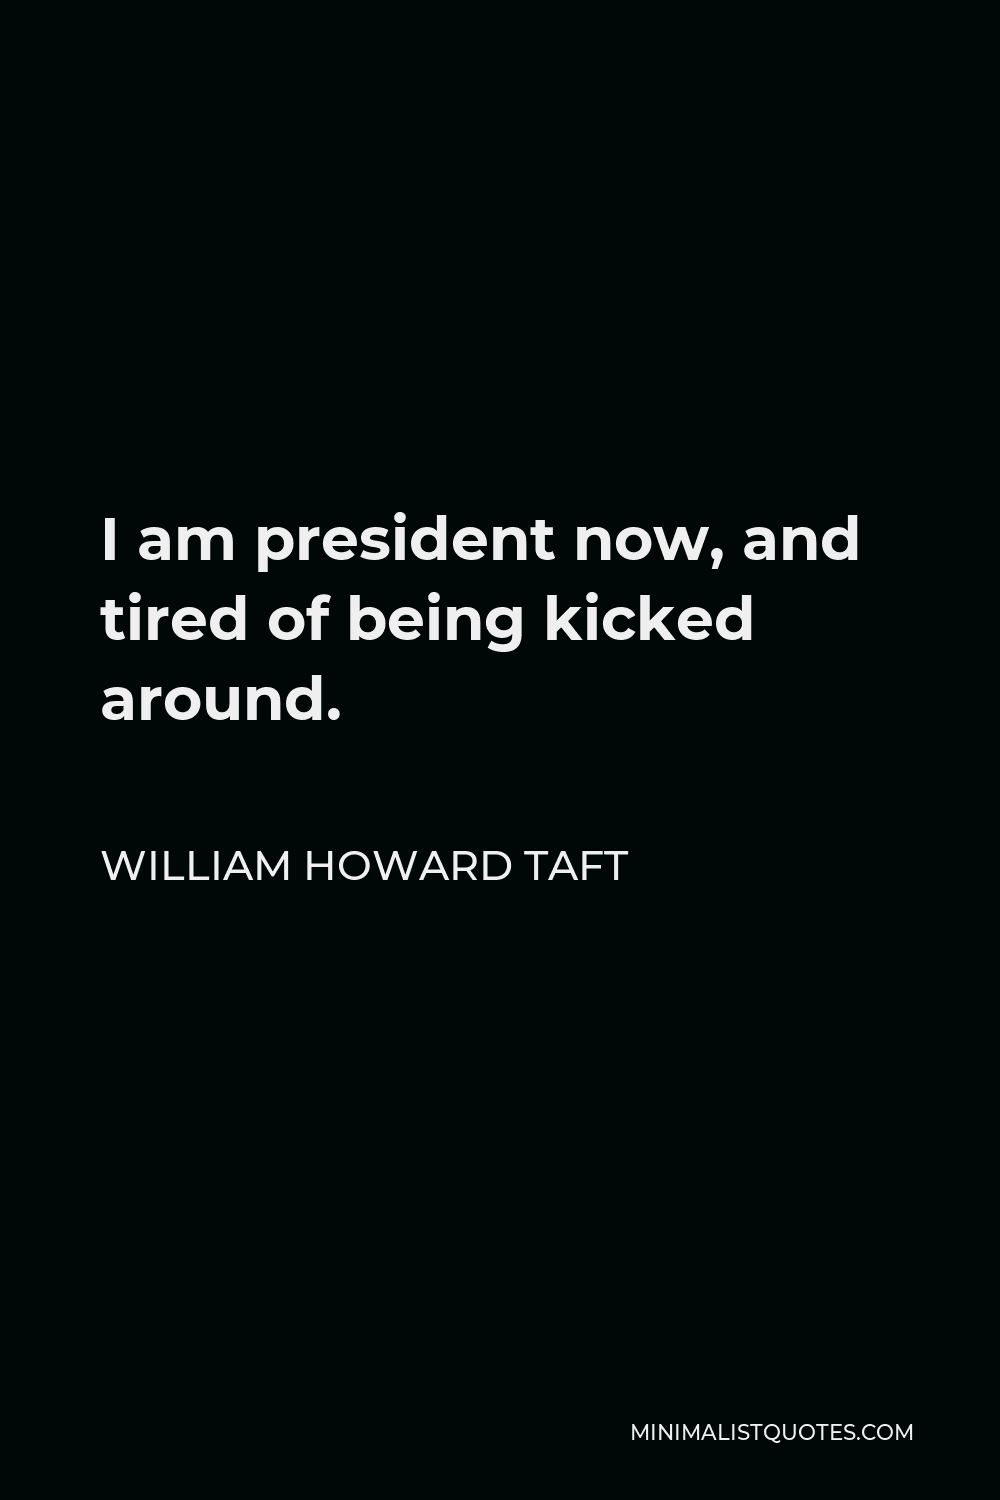 William Howard Taft Quote - I am president now, and tired of being kicked around.